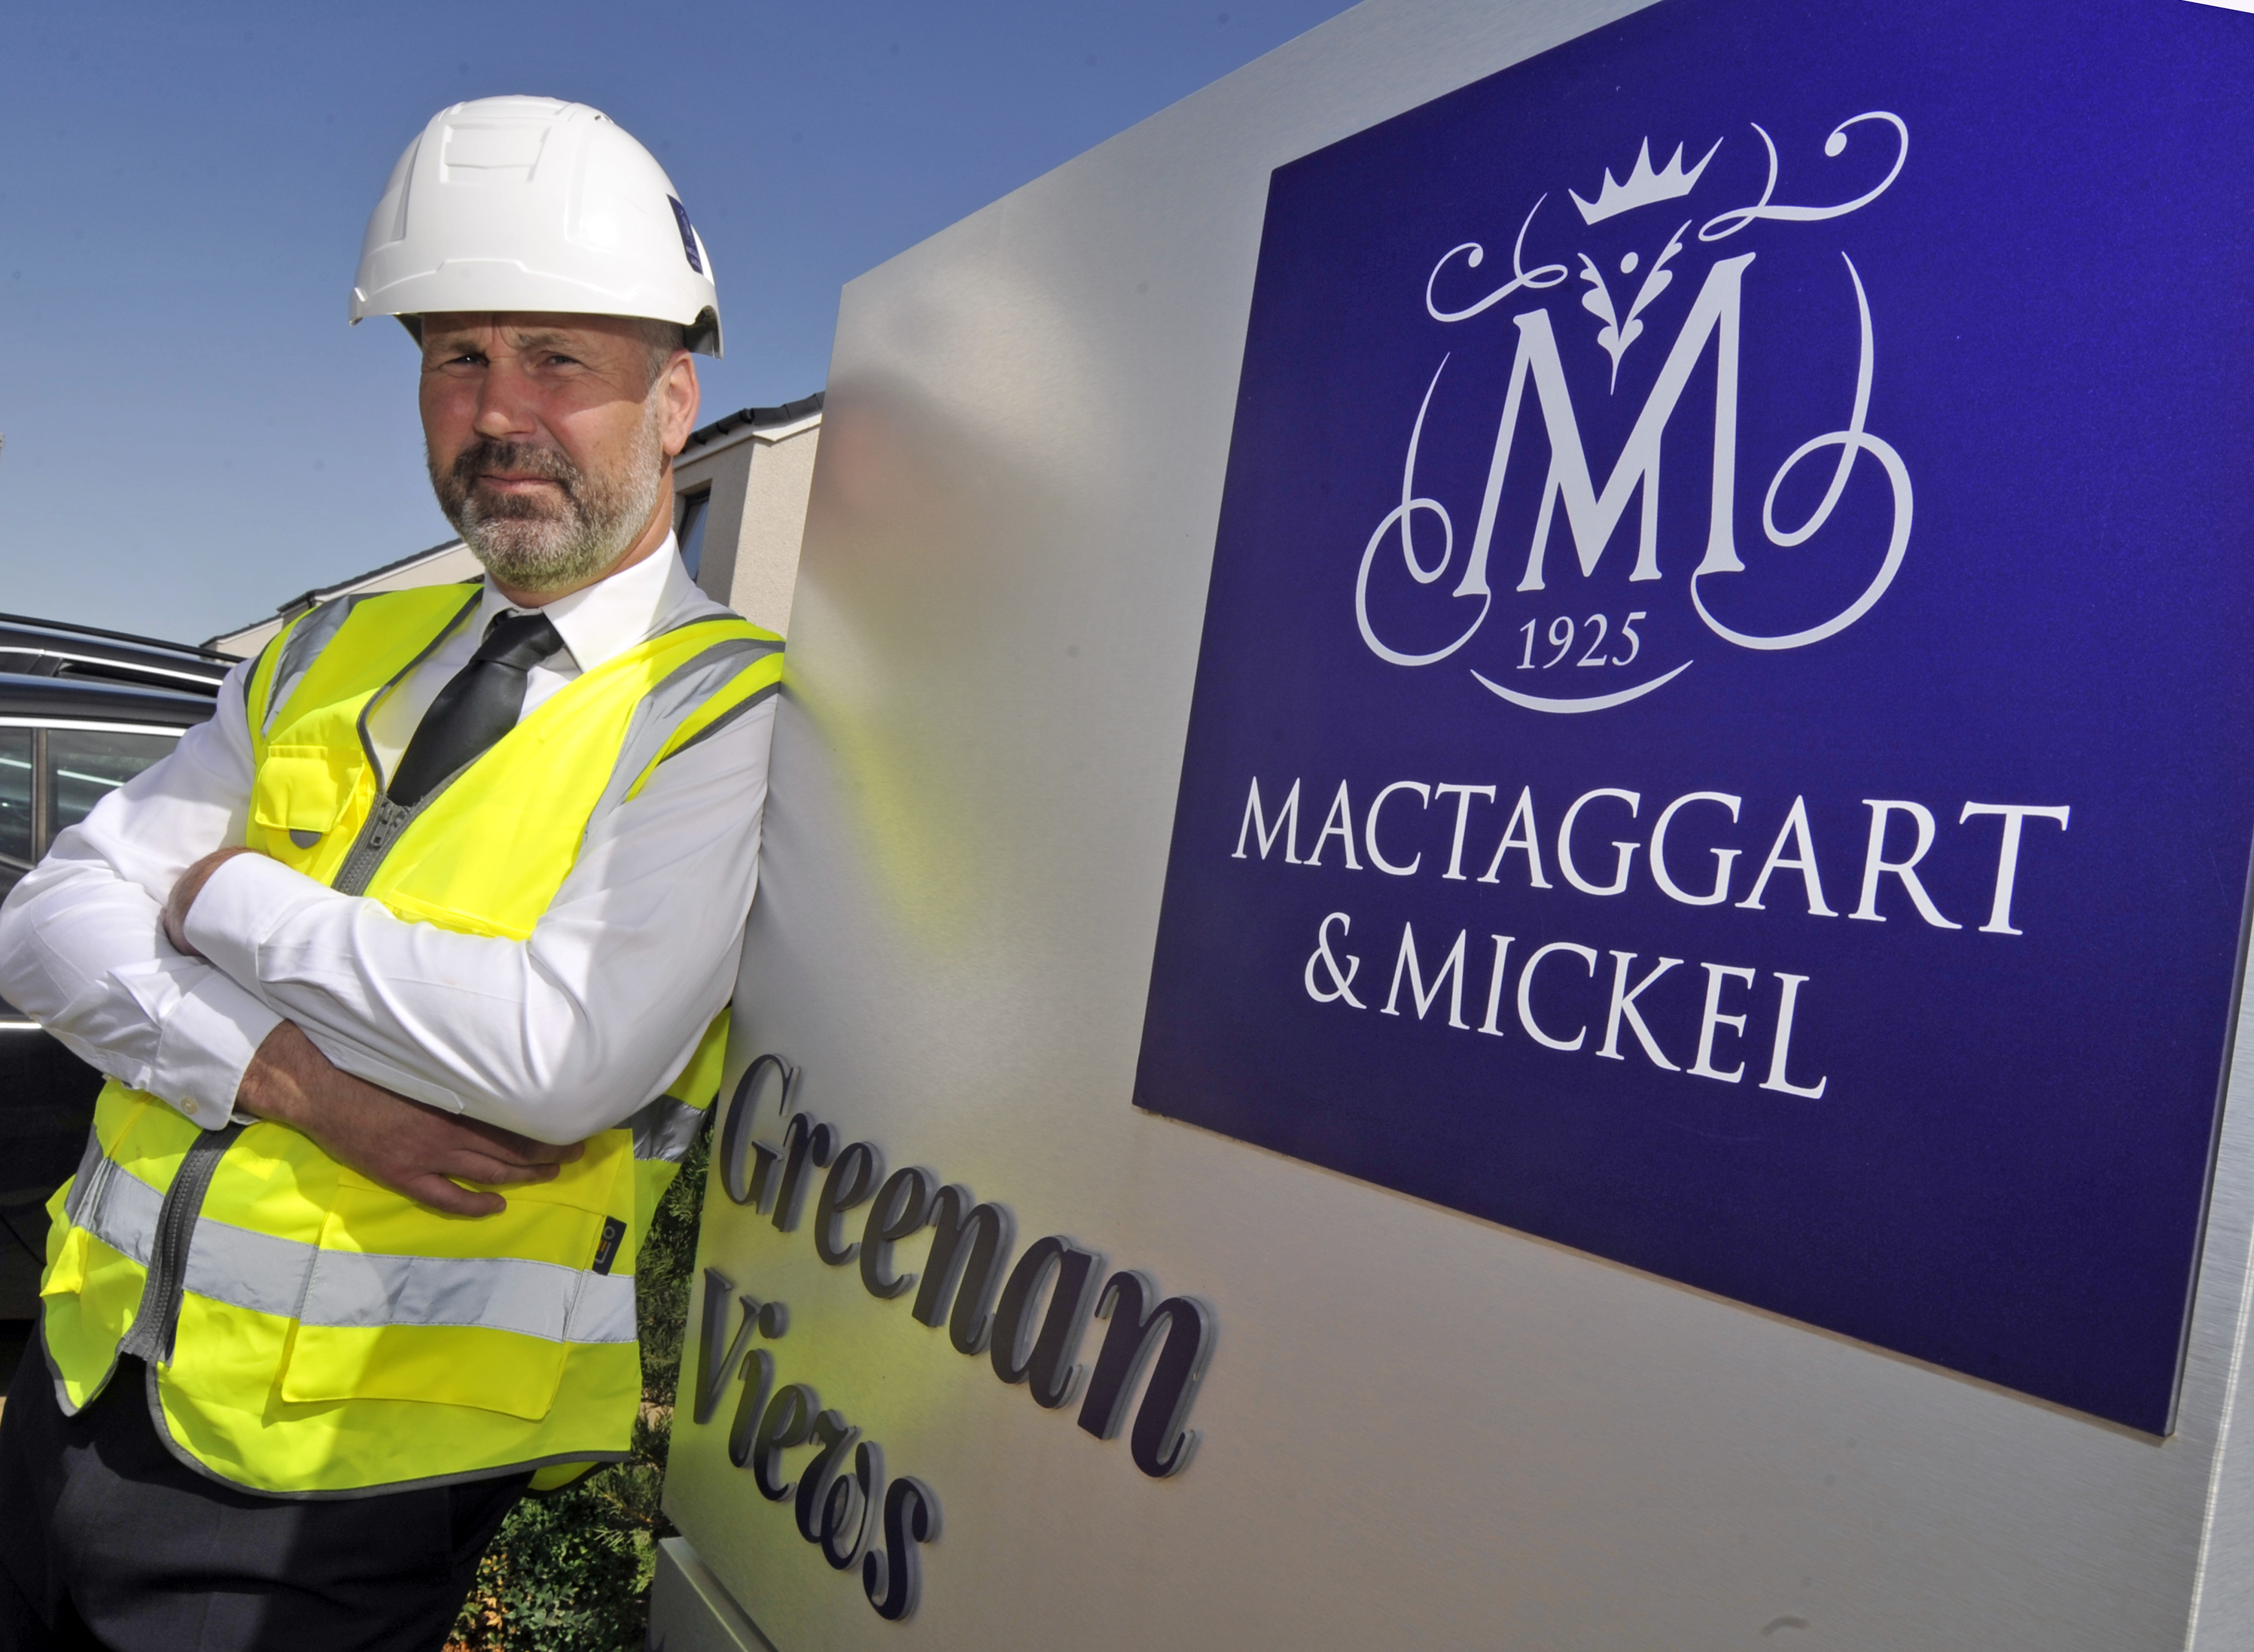 Mactaggart & Mickel site manager recognised in Scottish Parliament motion